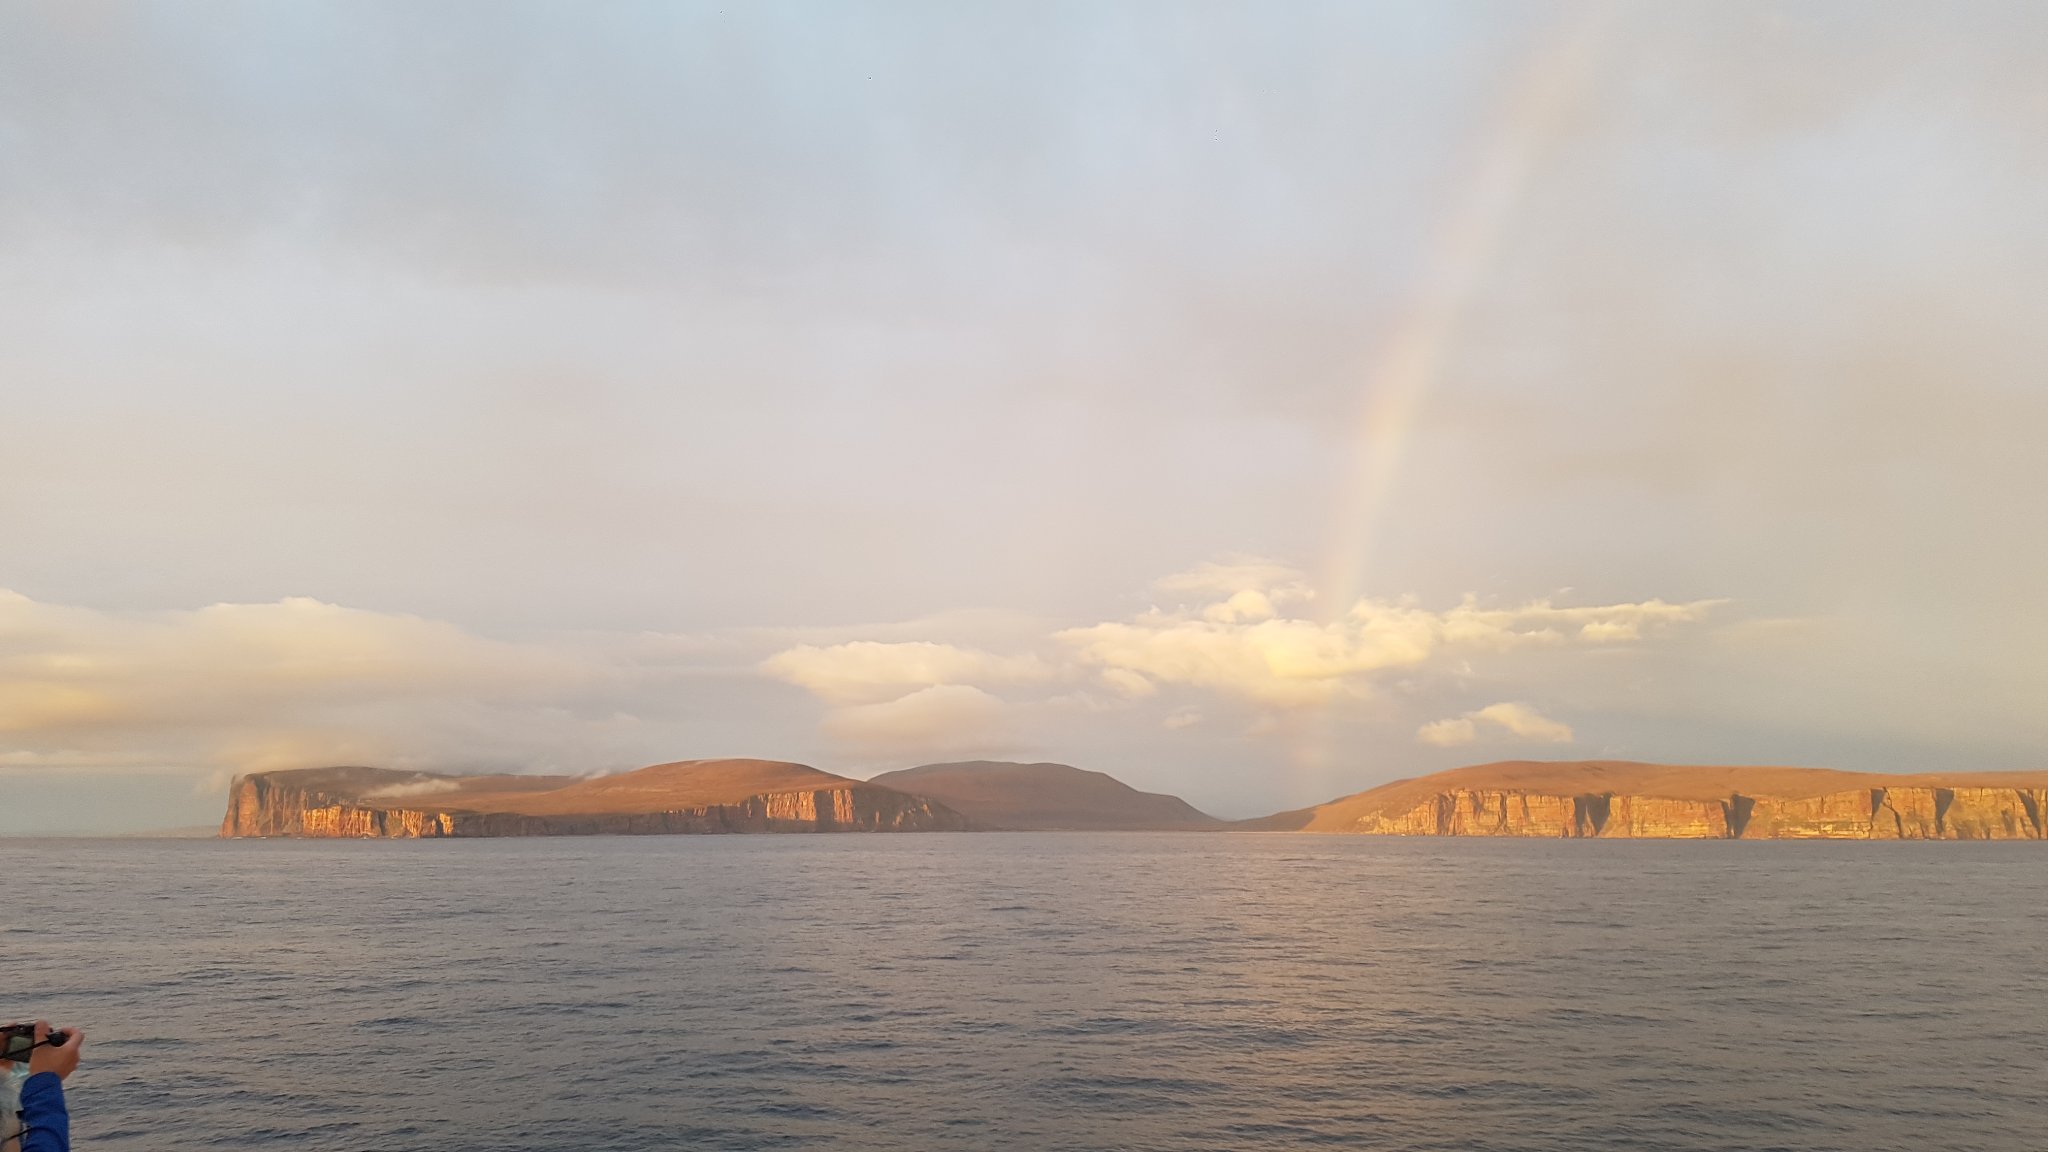 Approaching Orkney - image by Richy Ainsworth